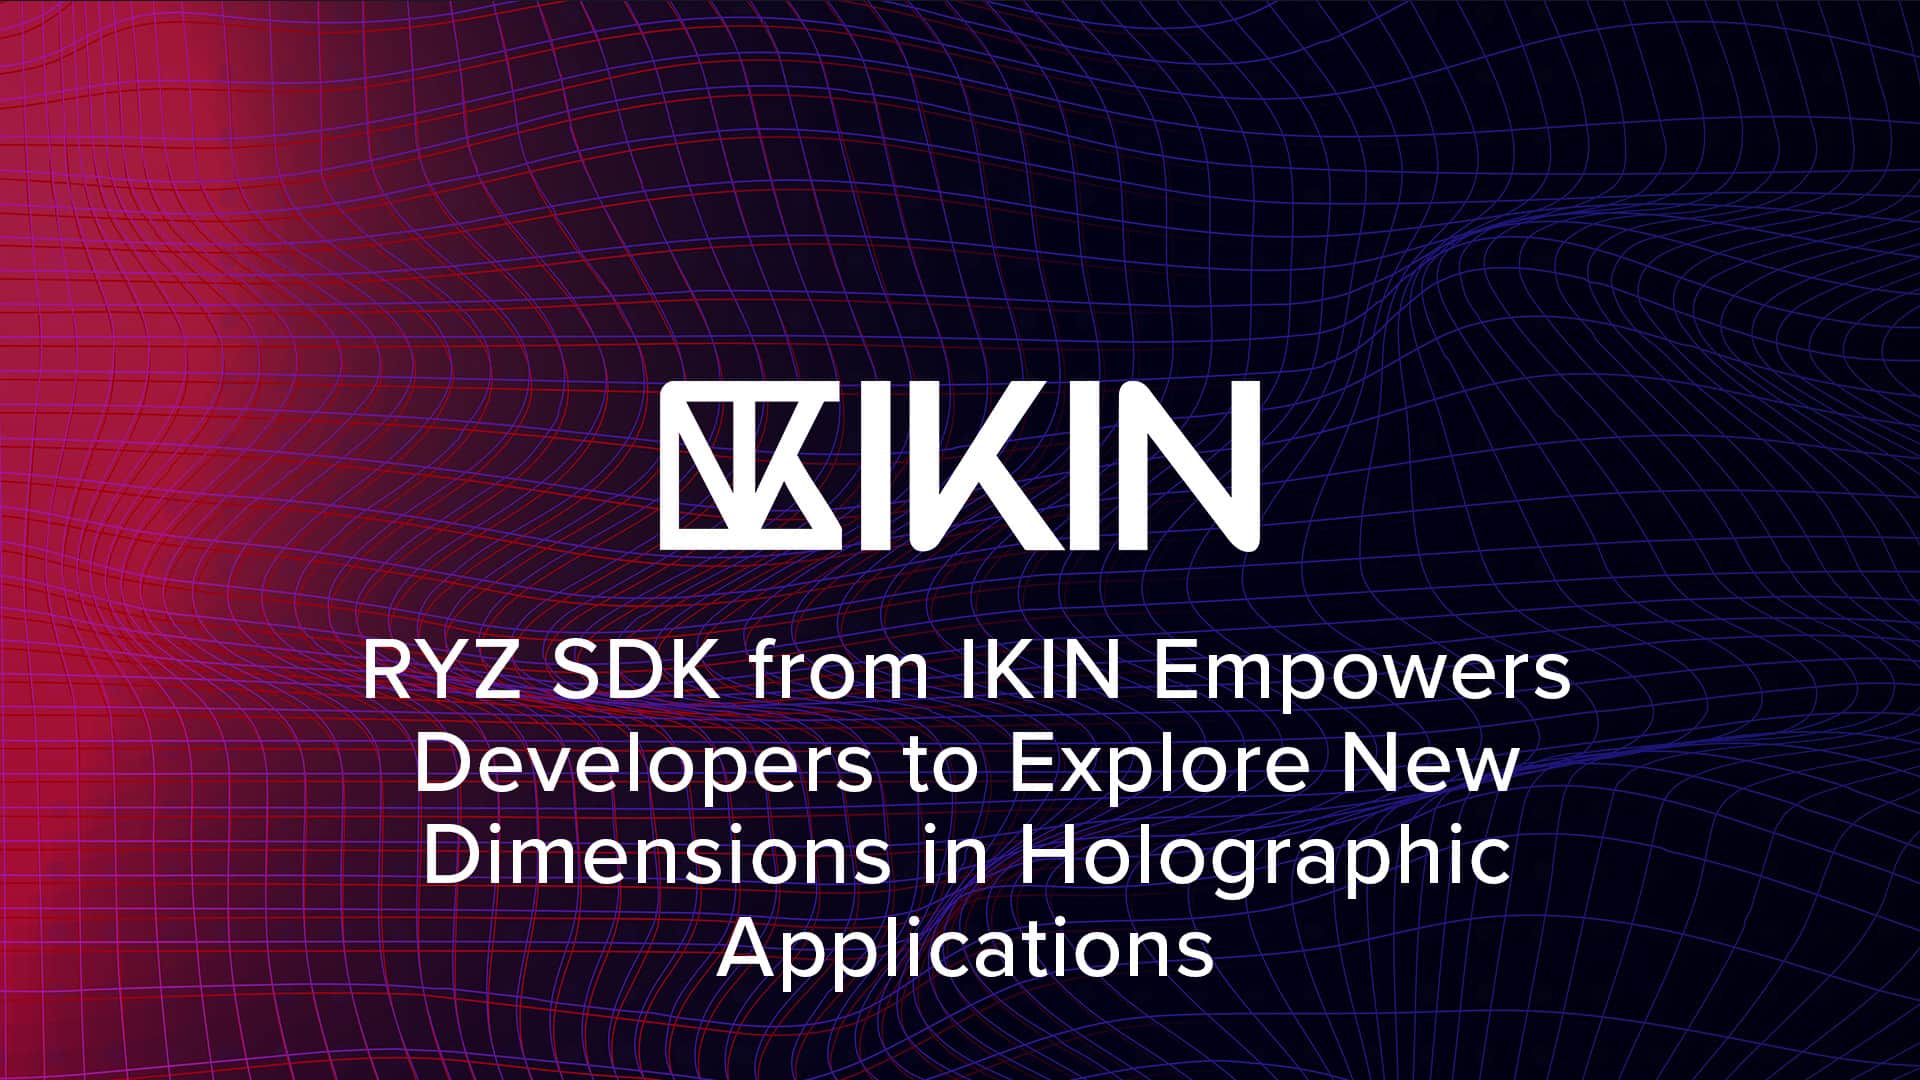 RYZ SDK from IKIN Empowers Developers to Explore New Dimensions in Holographic Applications